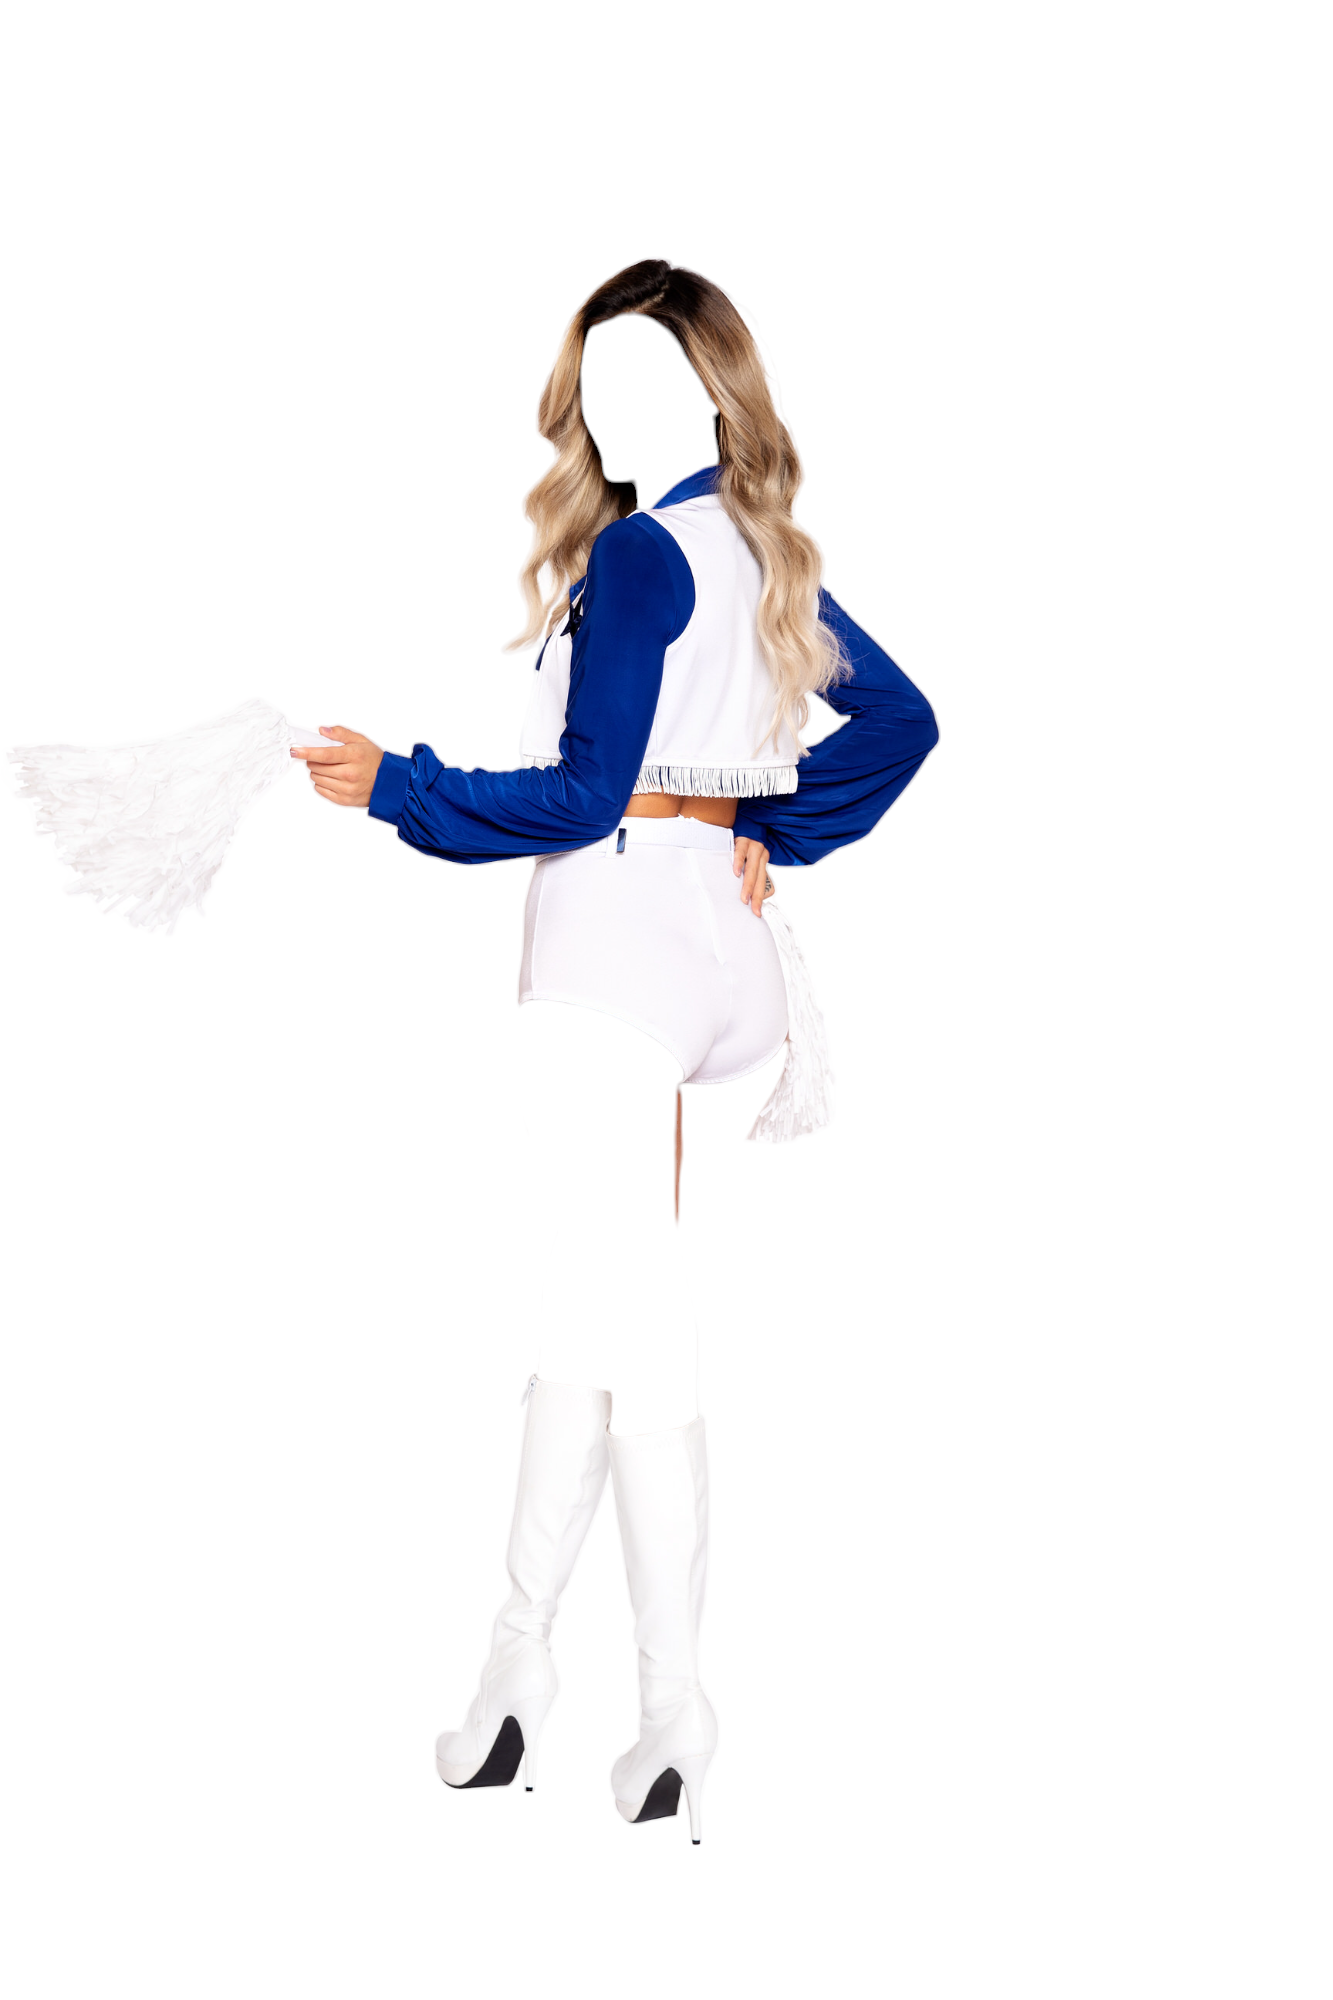 Roma Costume 5 PC Cheerleader Long Sleeve Tie Top with Vest White/Blue